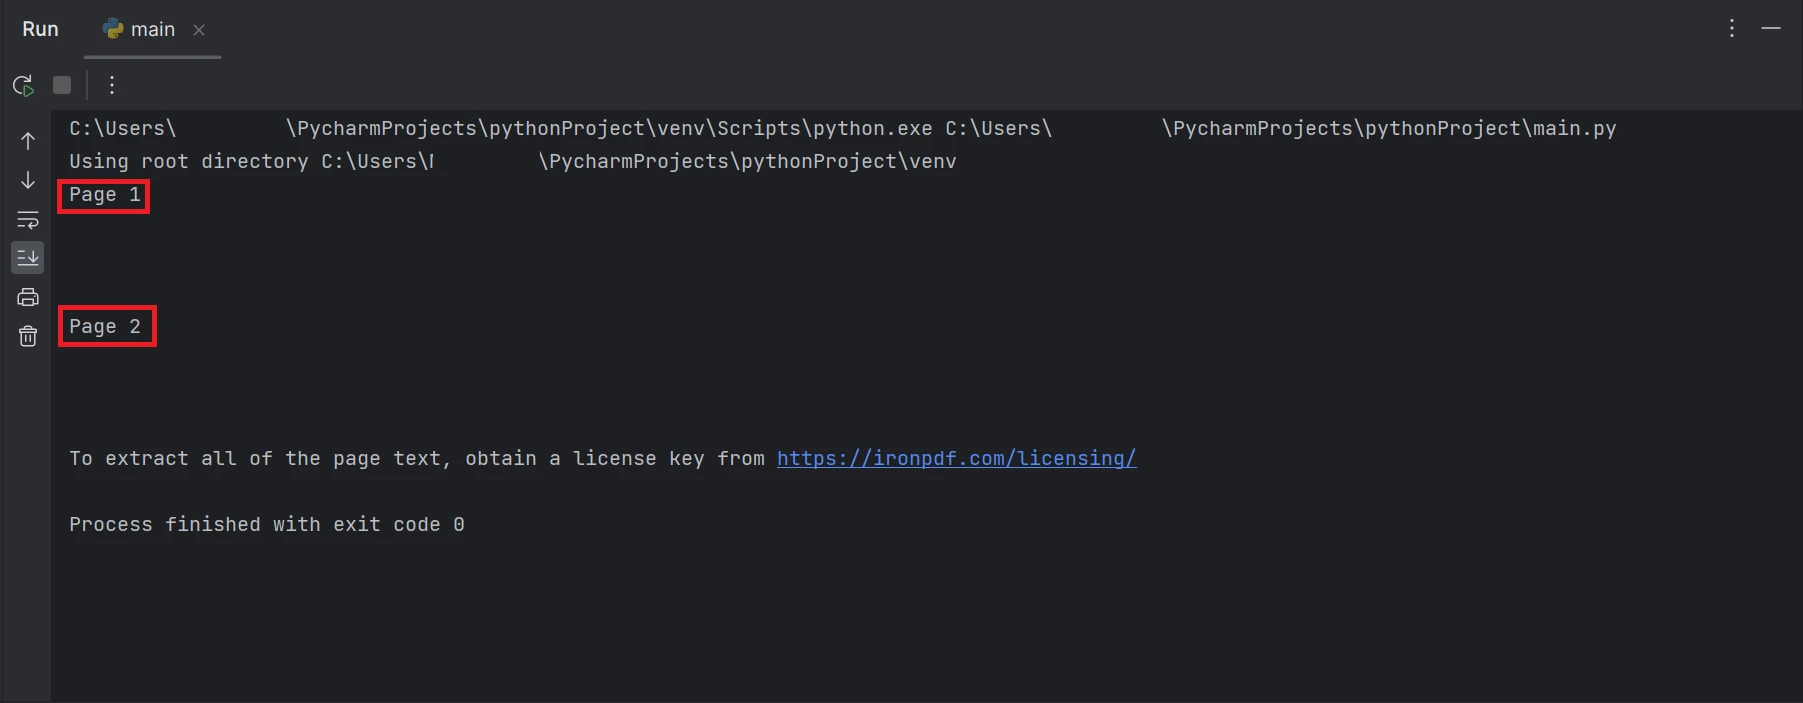 How to Parse A PDF File in Python: Figure 7 - A screenshot of the terminal with text output Page 1, and Page 2.